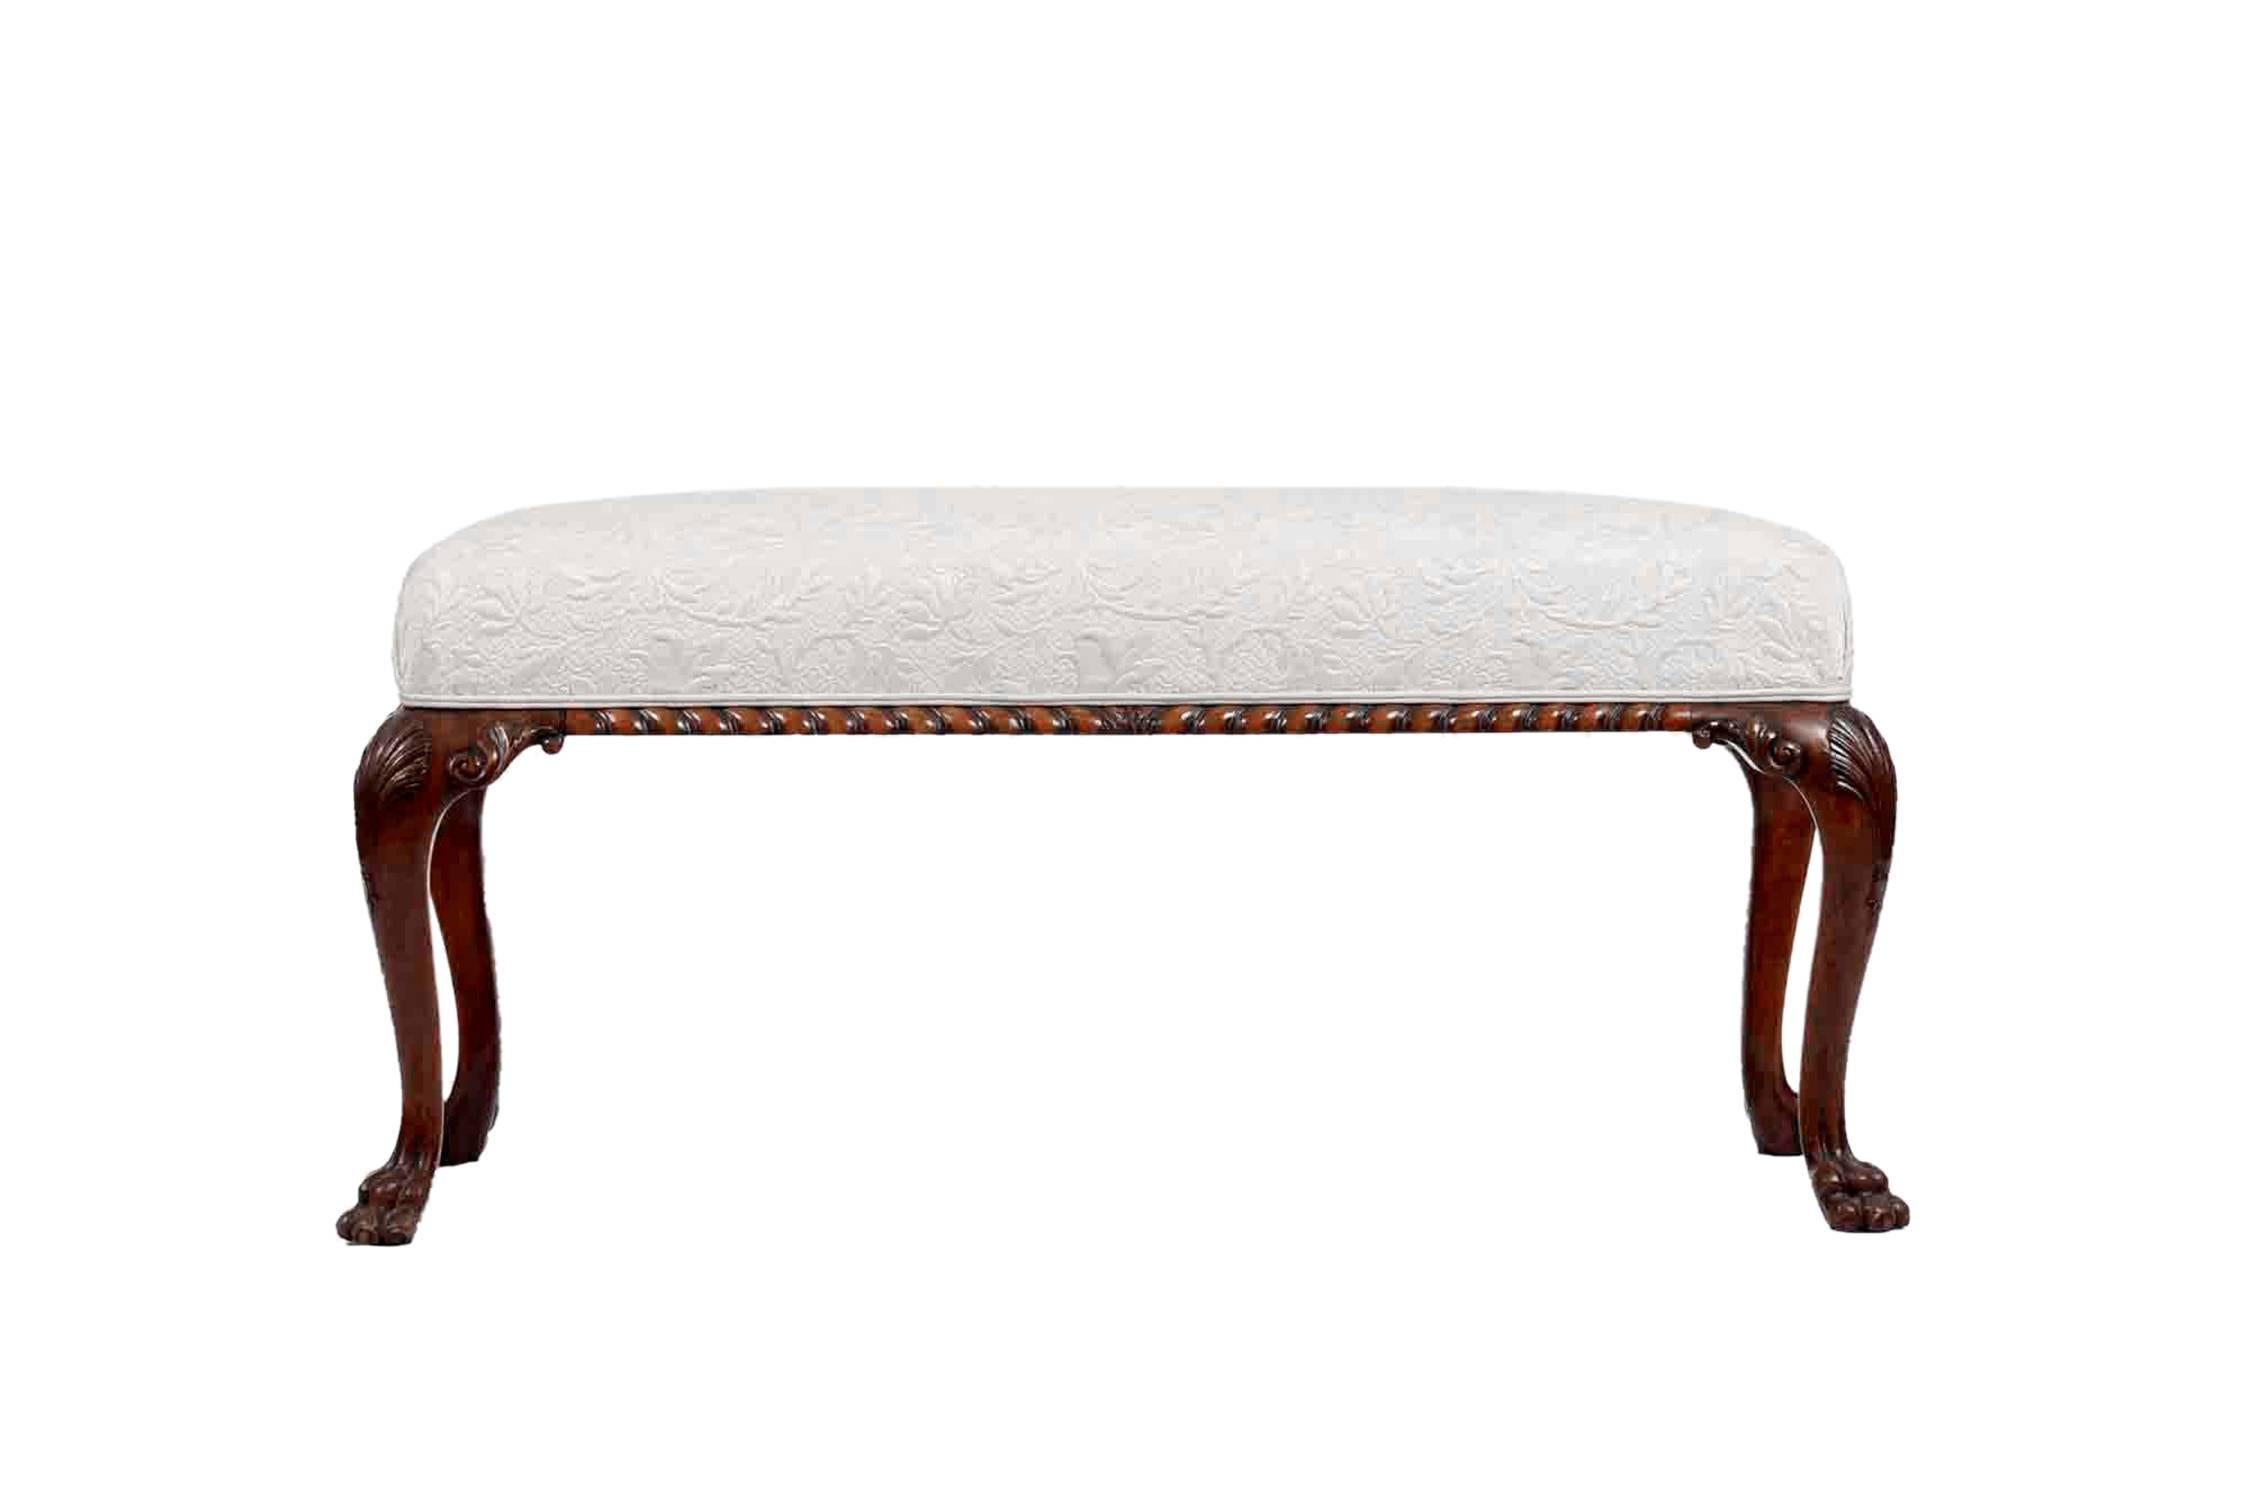 George III carved walnut stool with upholstered seat. With a gadrooned seat rail, shell-carved cabriole legs and paw feet.